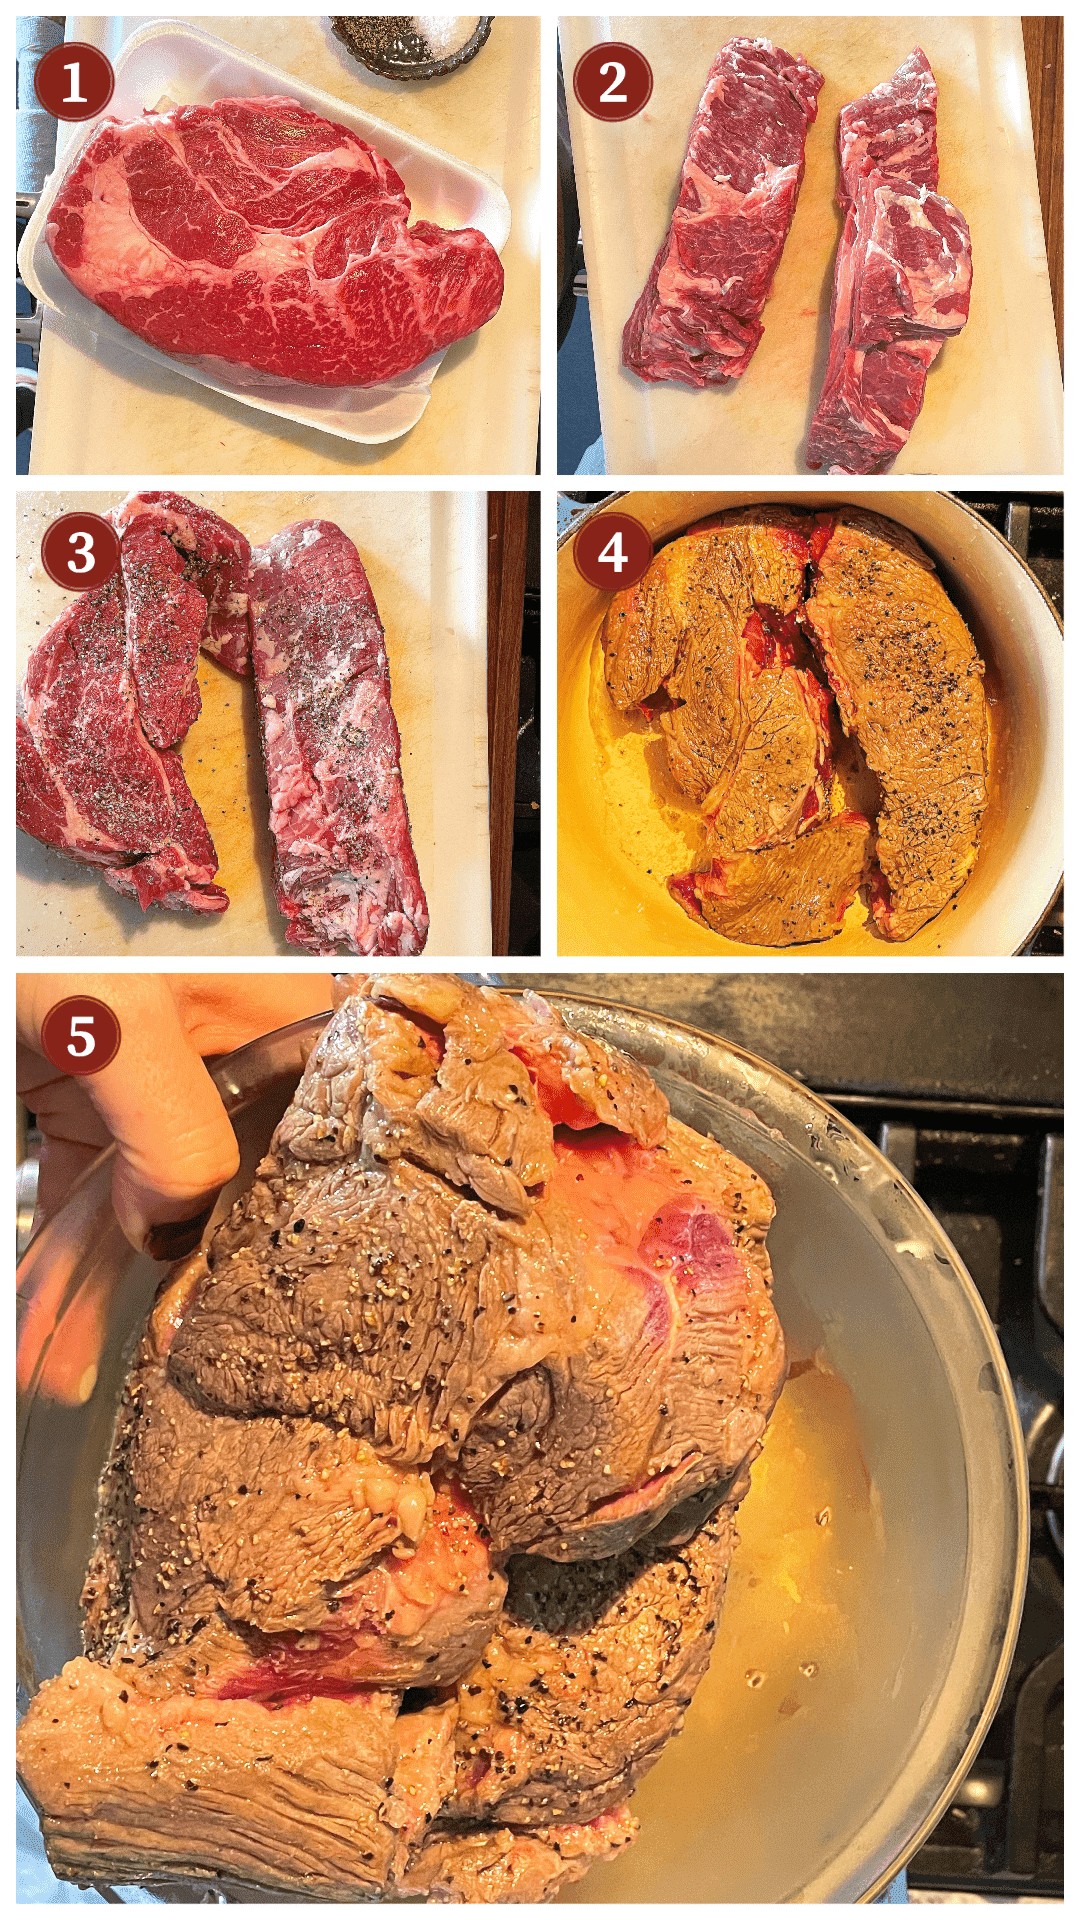 A collage of images showing how to cook roast beef debris, steps 1 - 5.